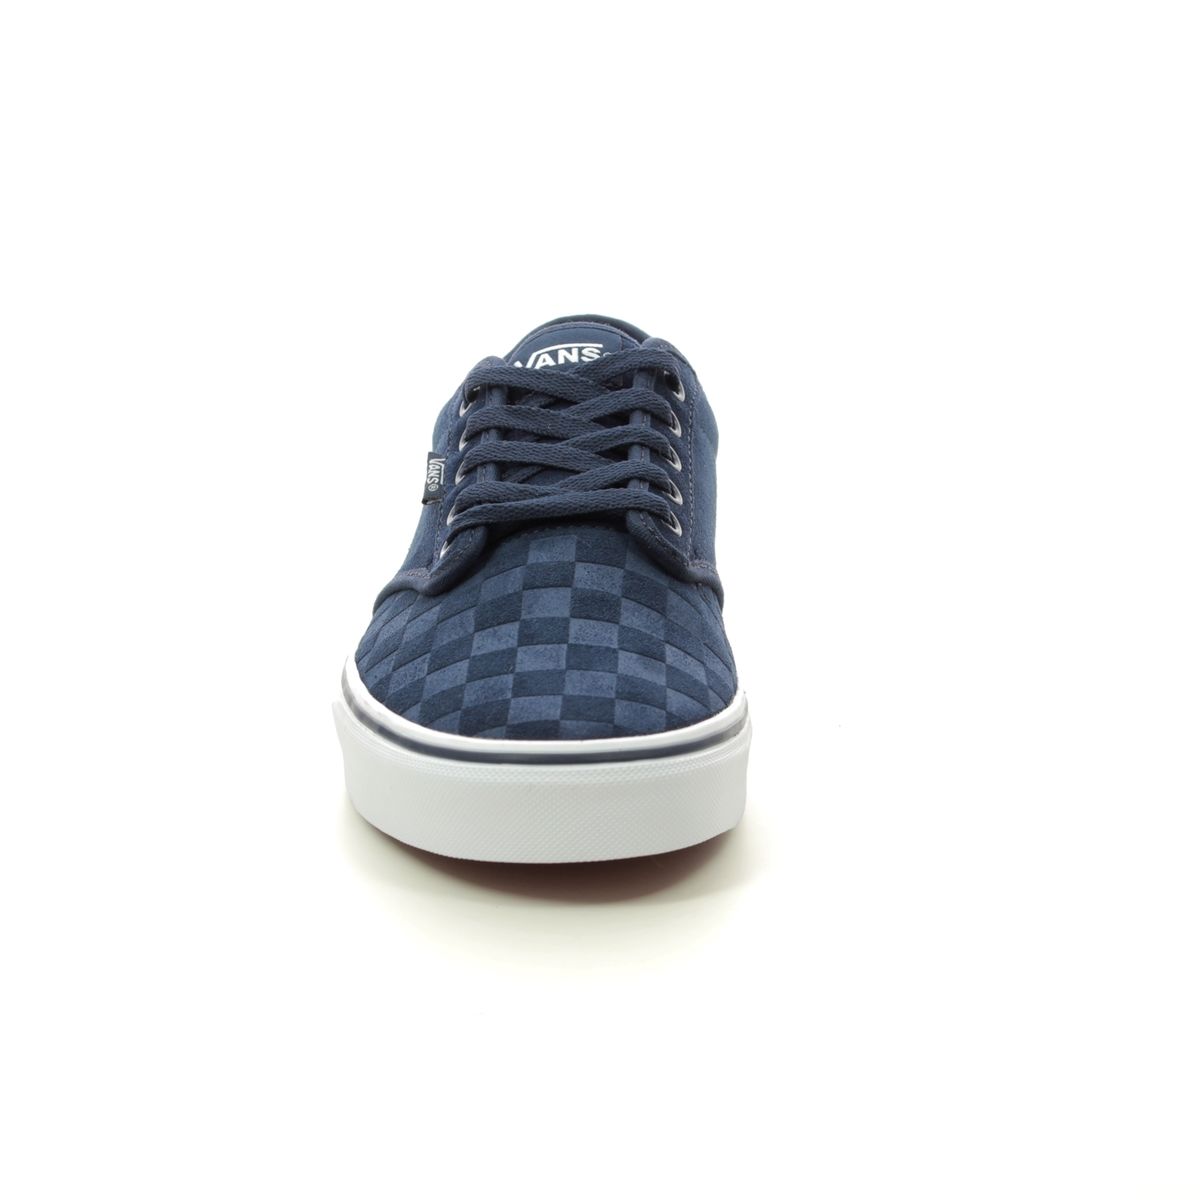 vans atwood checkers